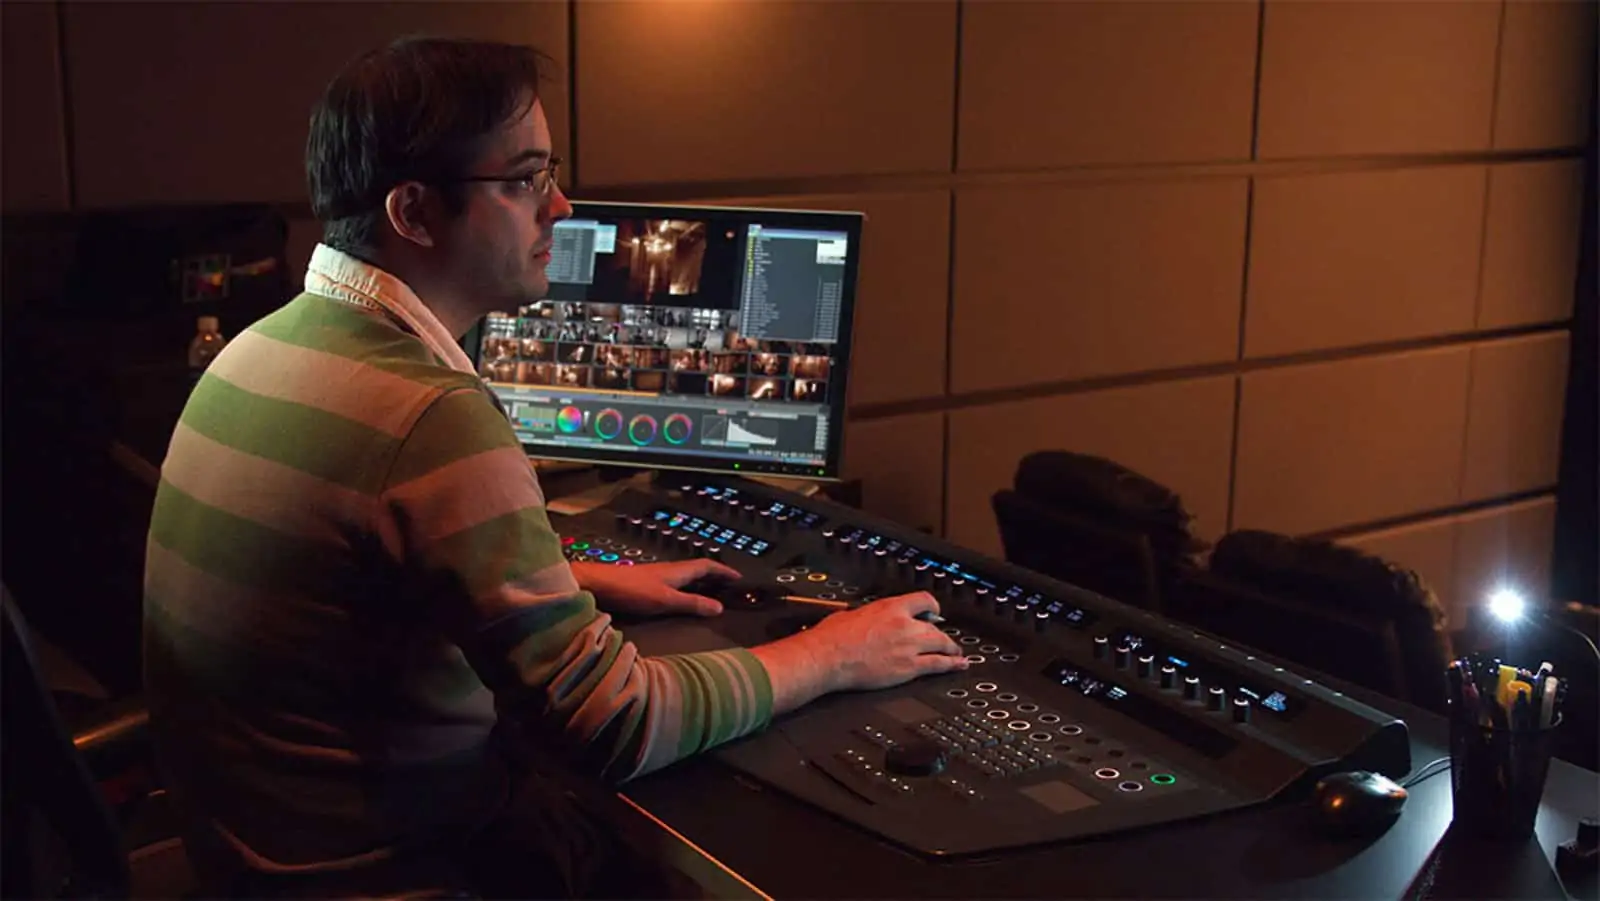 Ian Vertovec working on Quantel Pablo on <em>The Girl with the Dragon Tattoo</em> at Light Iron